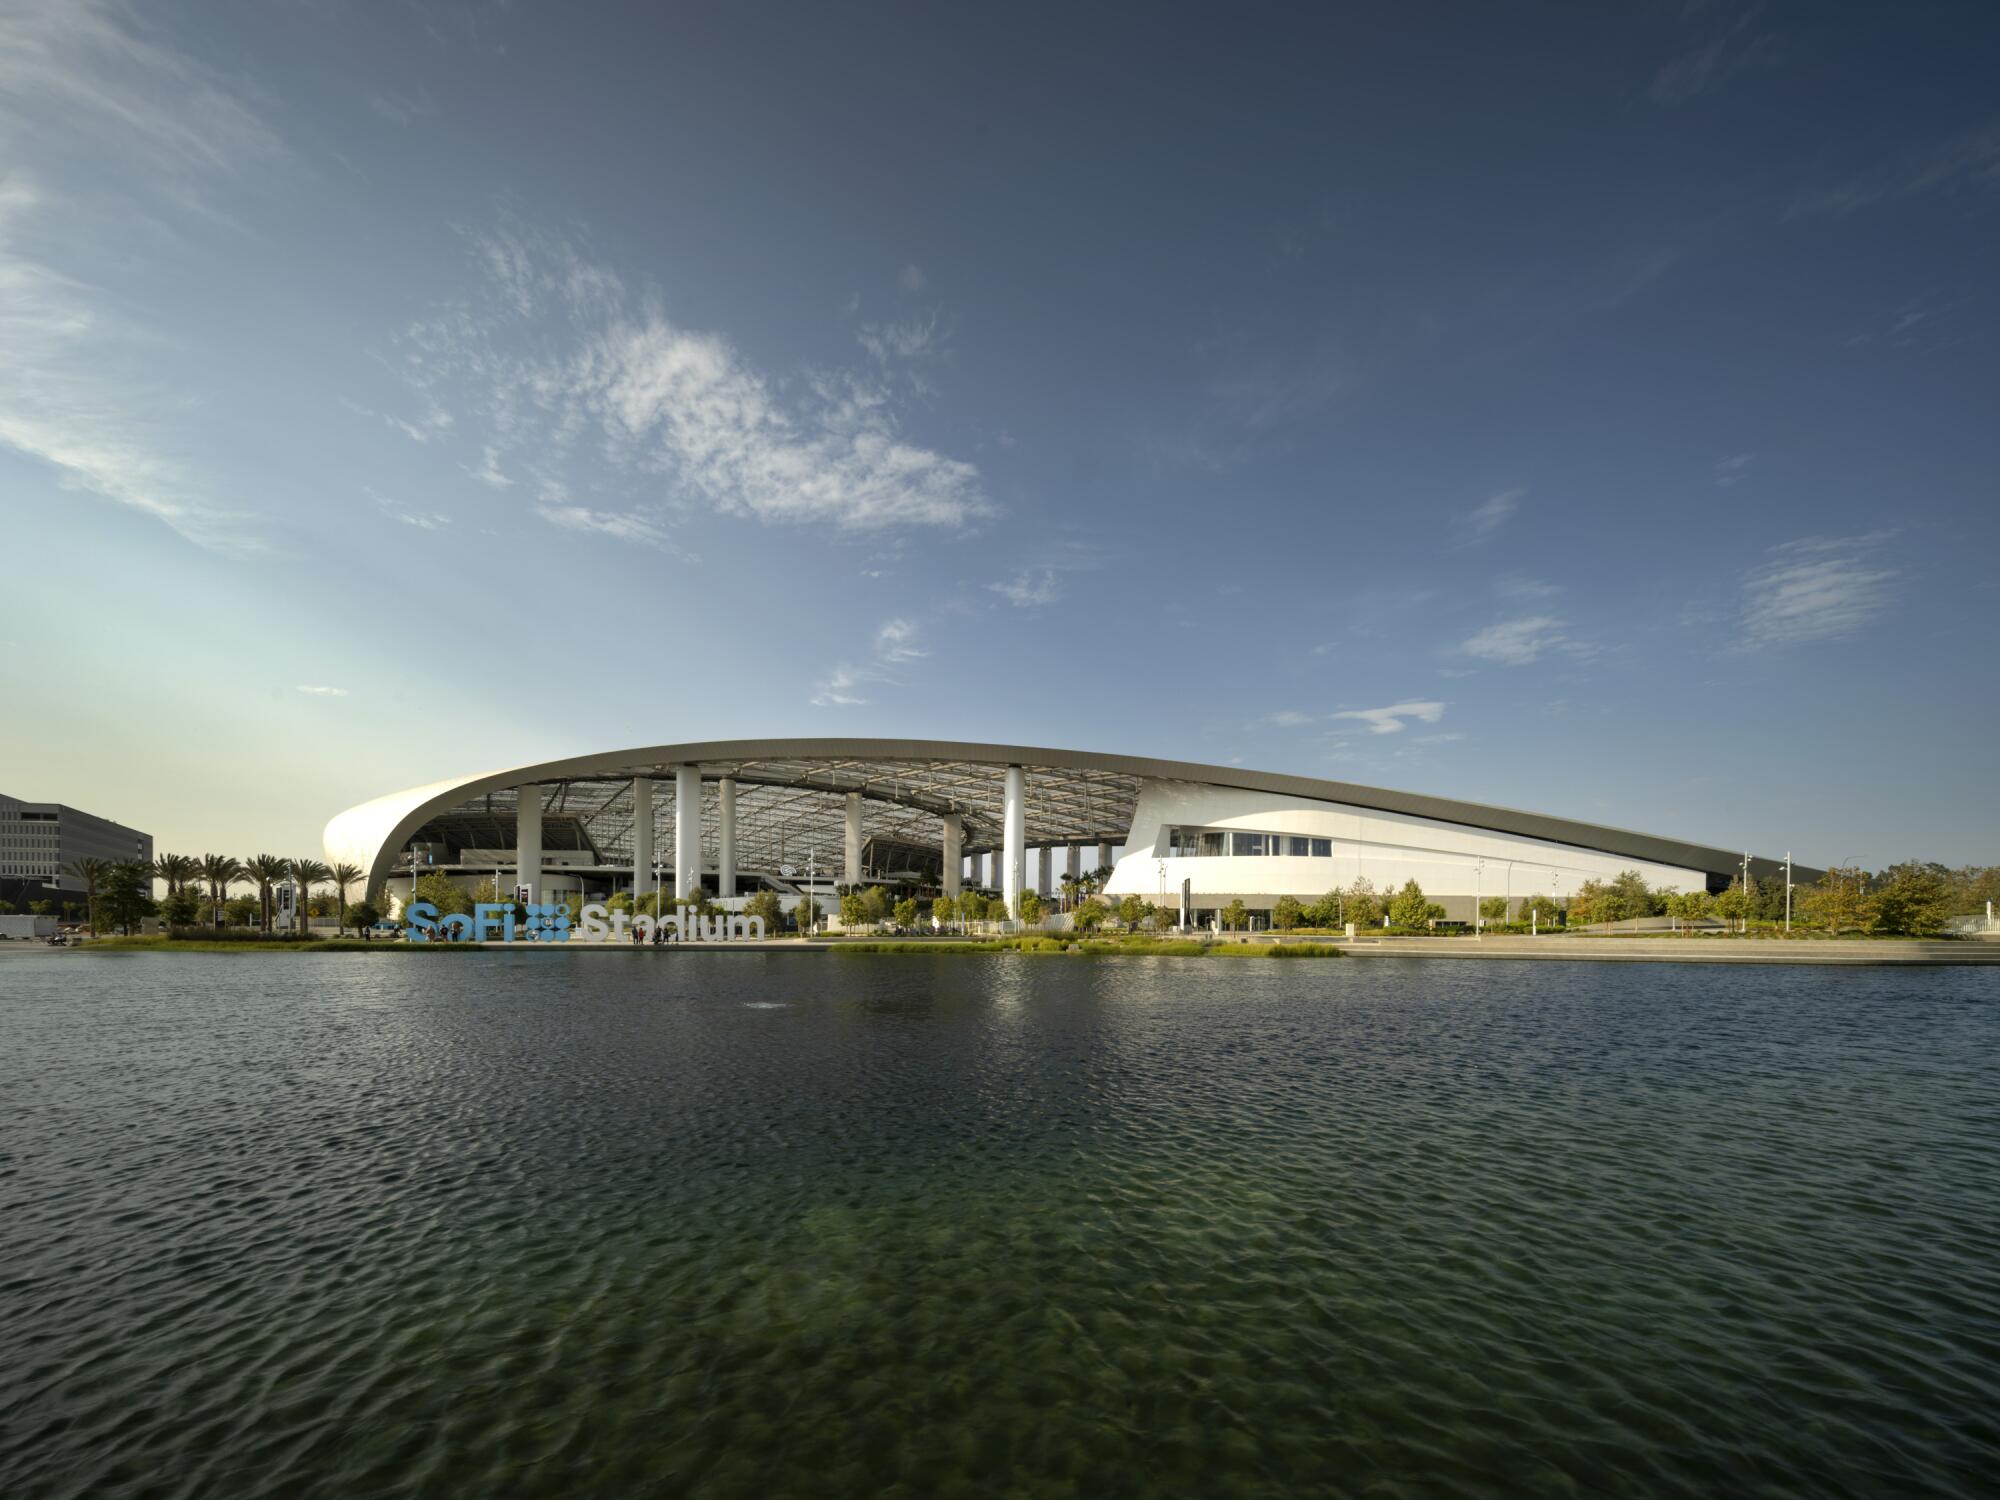 A placid lake sits before a stadium with a curving roofline.